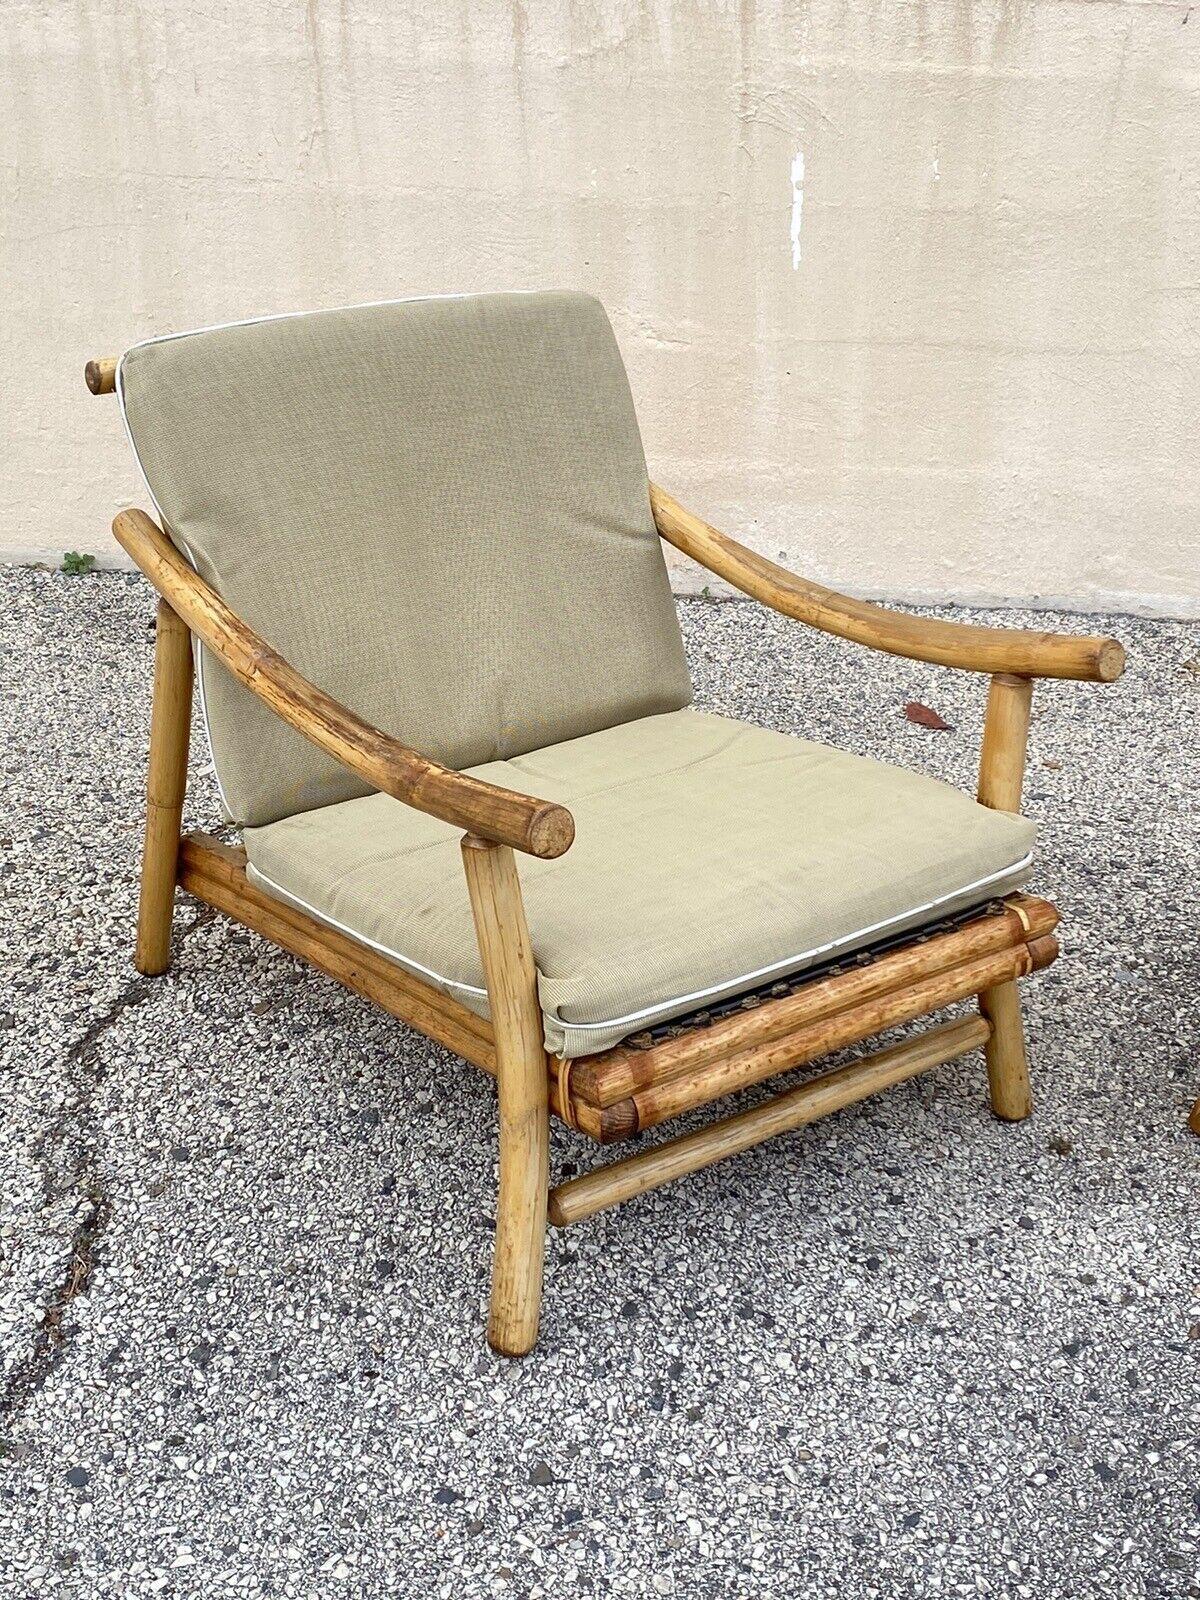 Vintage Ficks Reed Bamboo Rattan Tiki Sofa Set with Lounge Chairs - 3 Pc Set For Sale 2